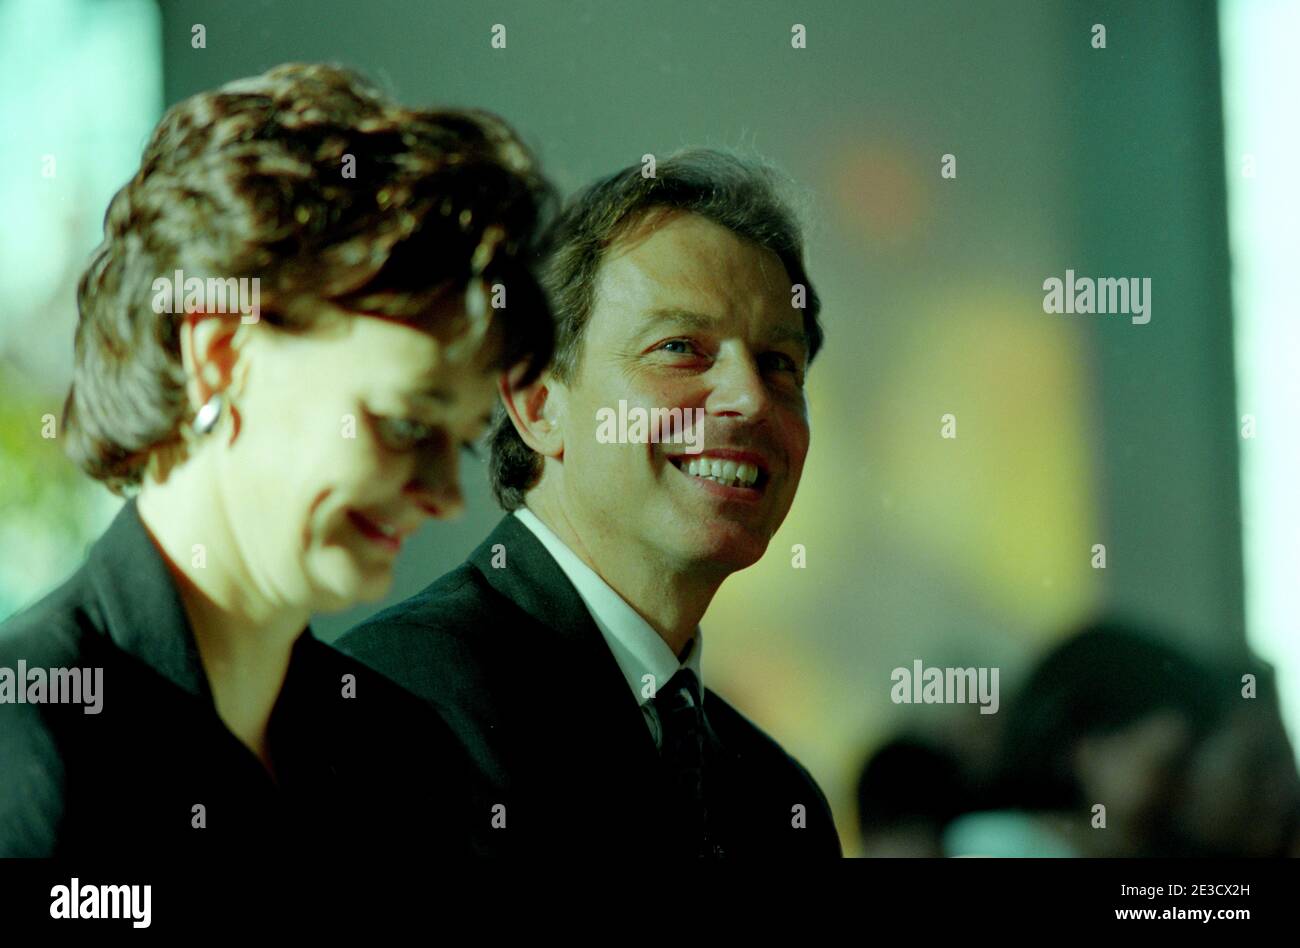 Labour Party Conference Brighton England UK October 1997 The first Labour Party Conference with Tony Blair as Prime Minister seen here with Cherie Blair his wife as they attend traditional Sunday morning church service in Brighton Stock Photo